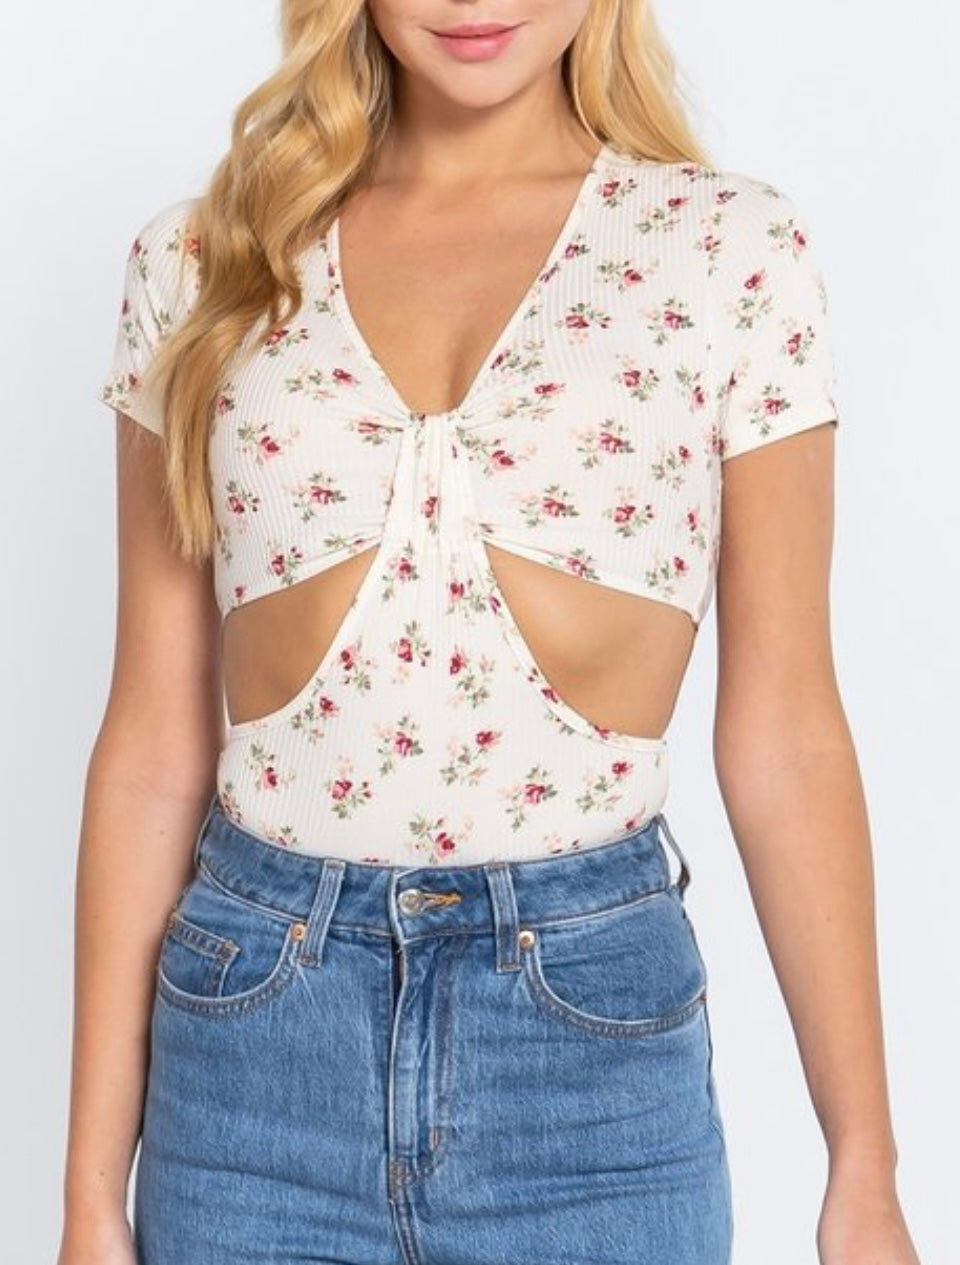 The “Hailey” Floral Ribbed Bodysuit